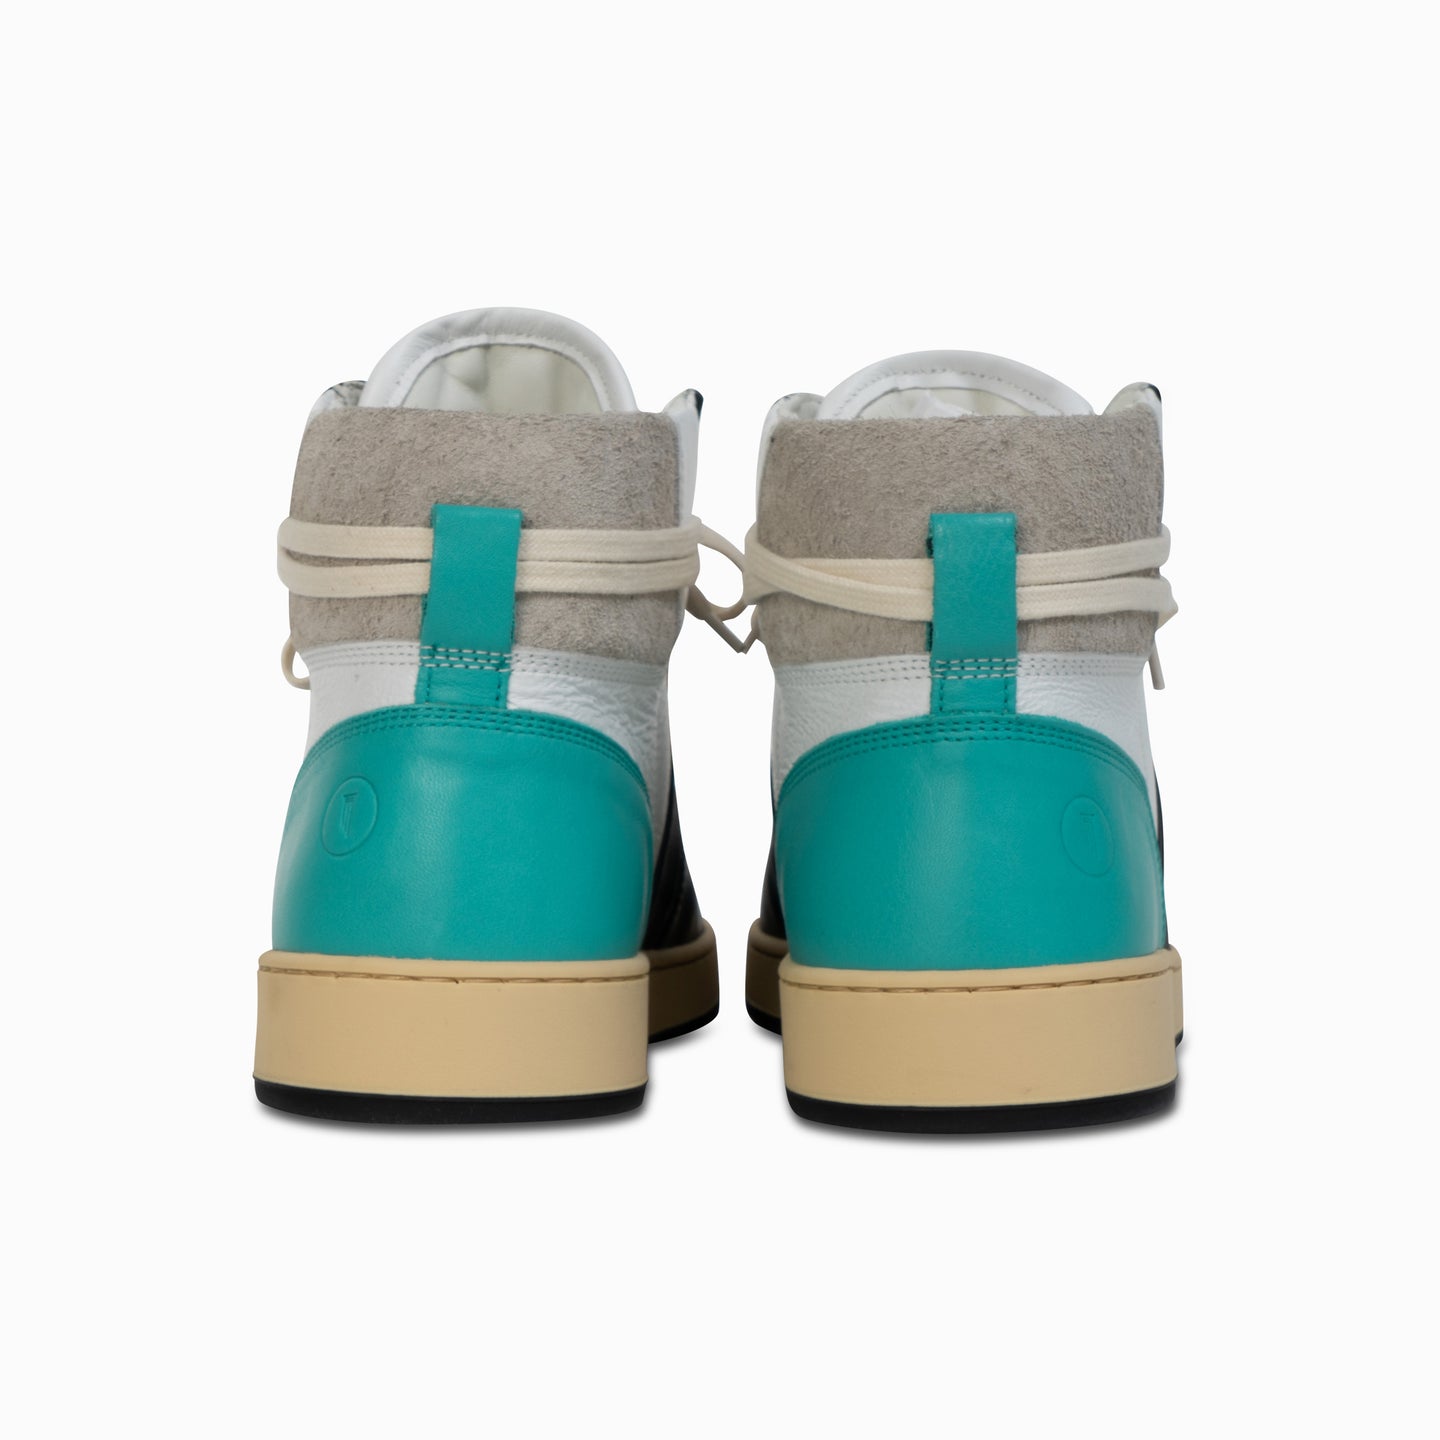 Women's Destroyer High - Turquoise